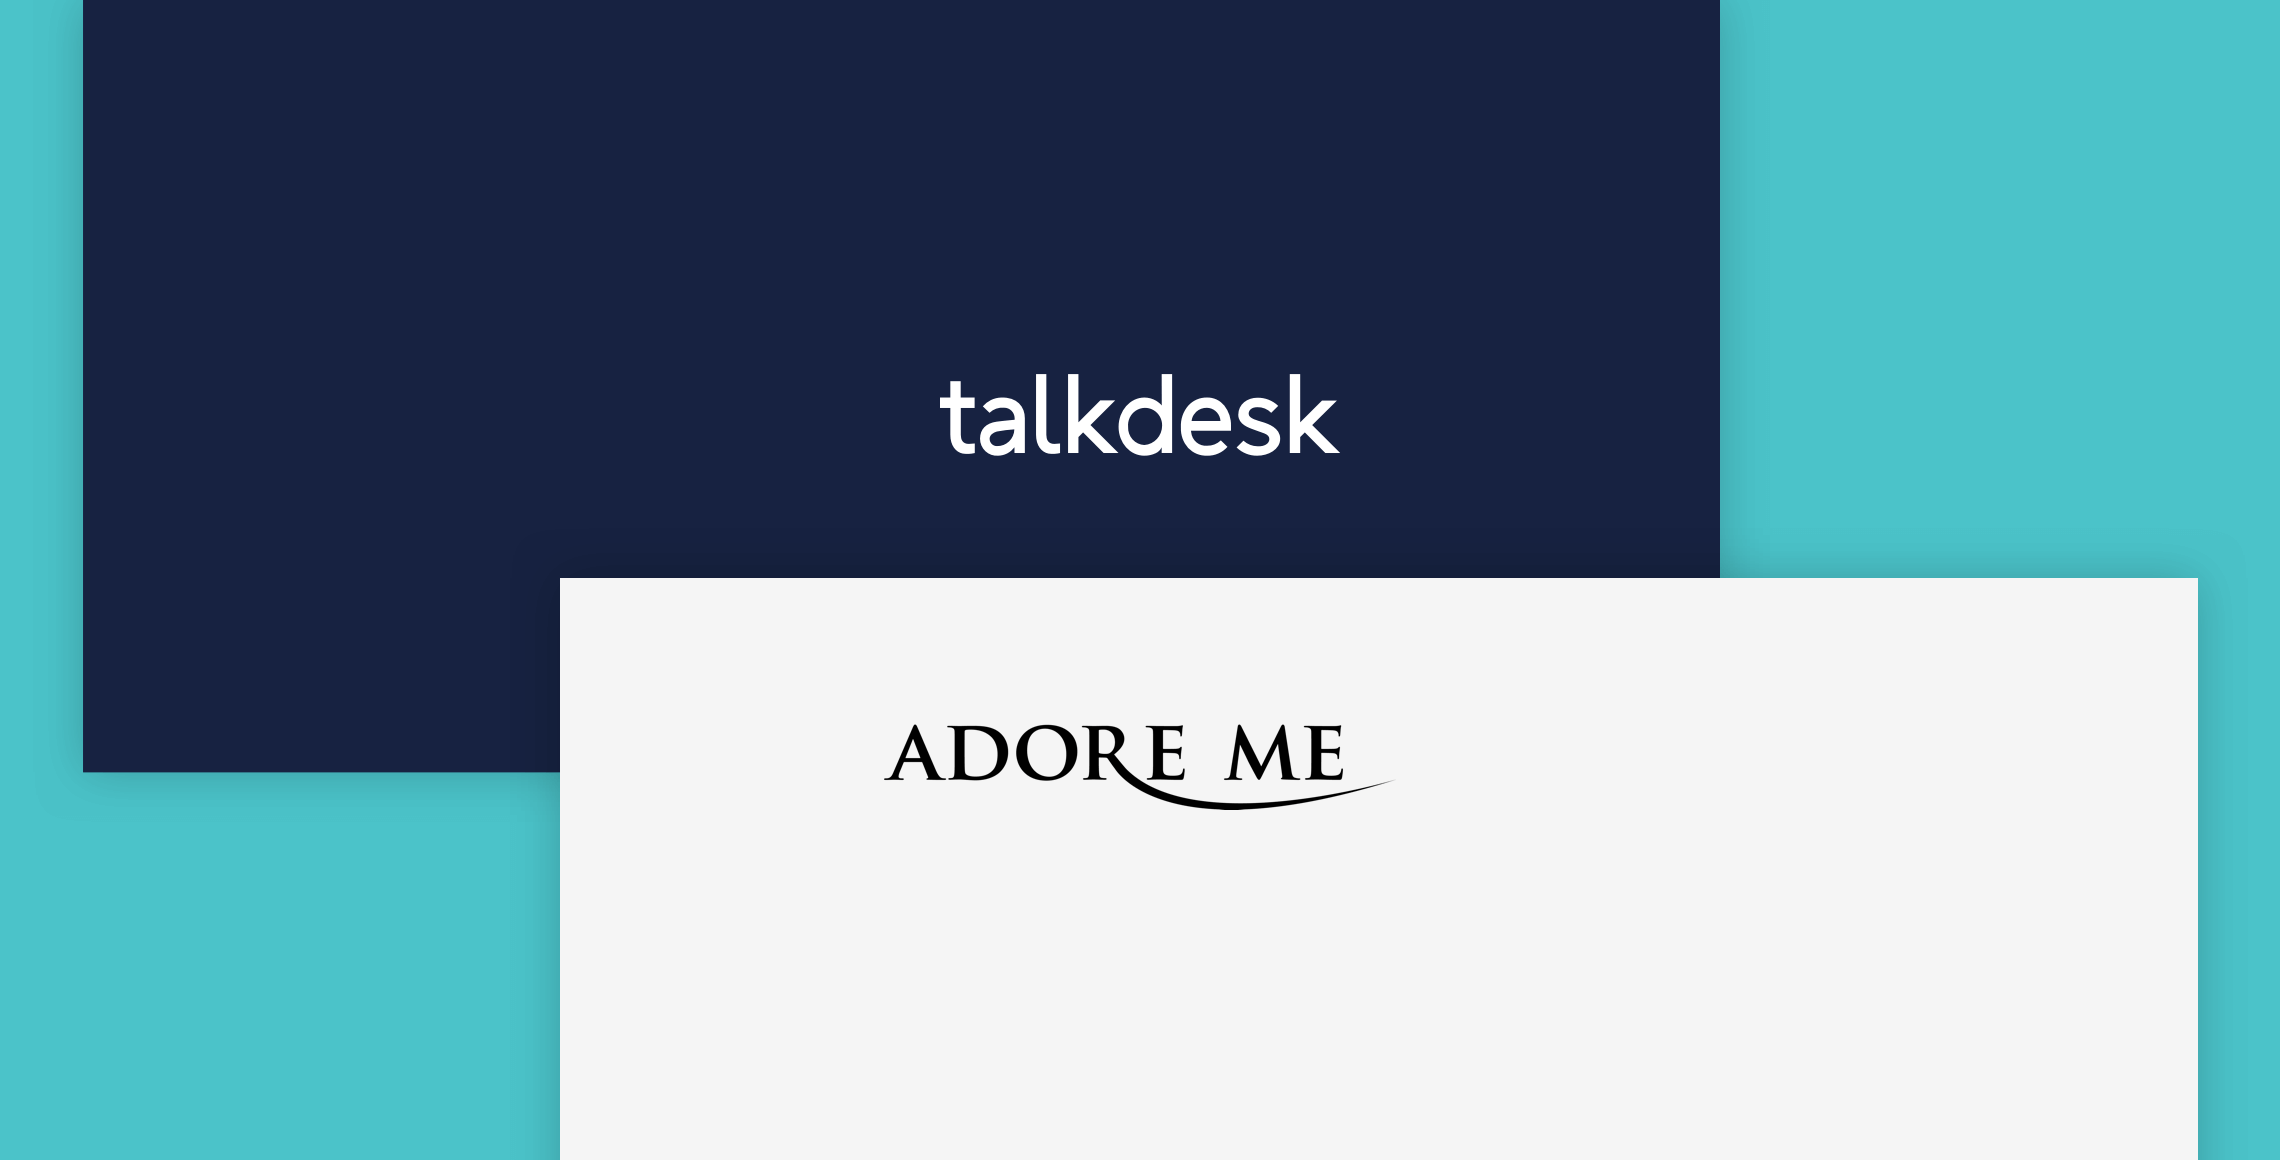 Talkdesk Chosen to Support Adore Me Customer Service Growth and